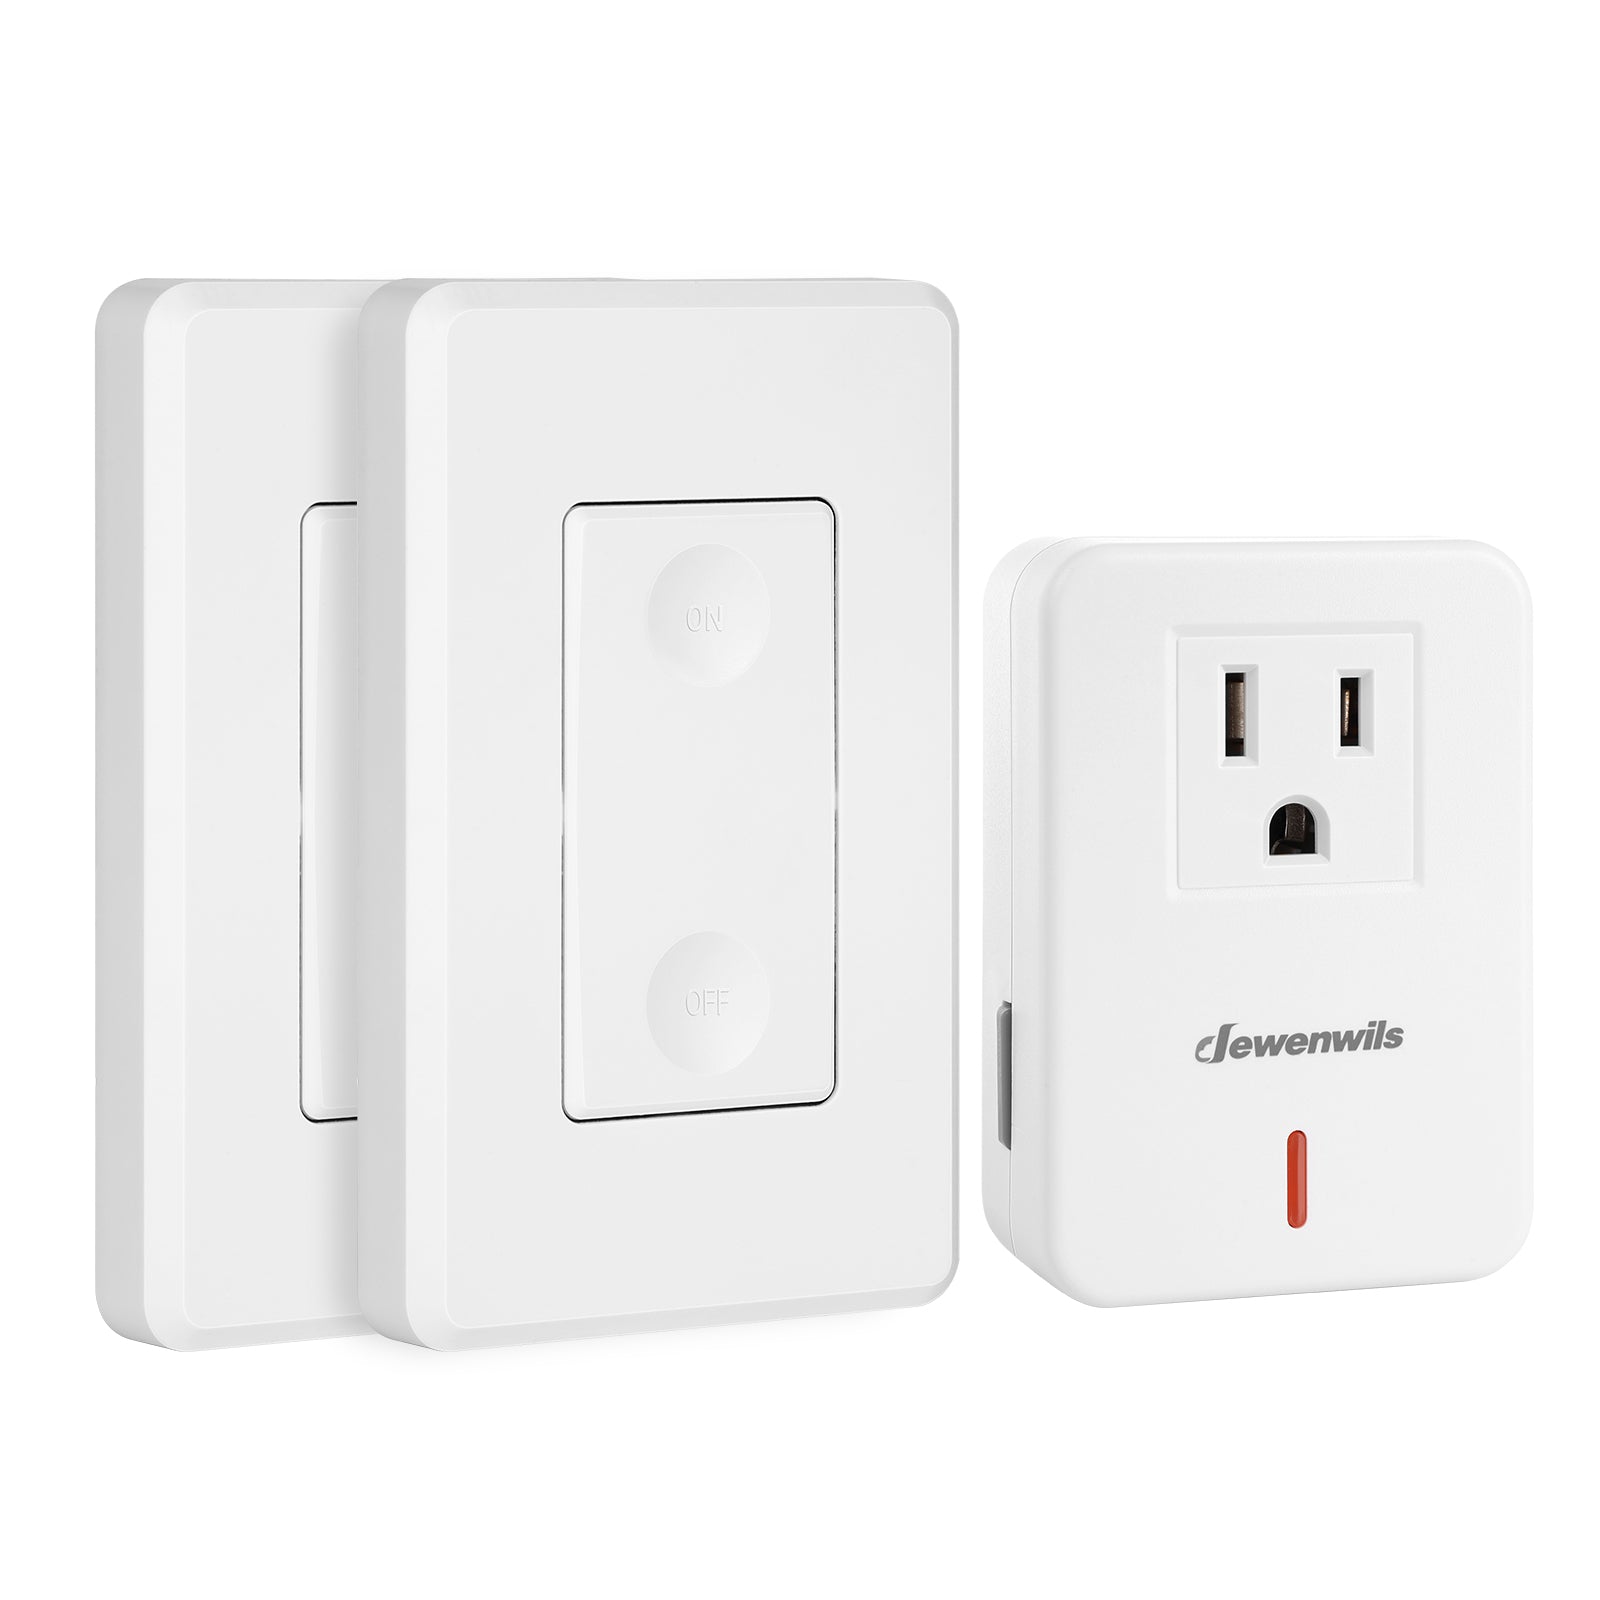 DEWENWILS Indoor 100ft Programmable Wireless Remote Control Outlet and  Switch (1 Remote + 4 Outlets)--SHRS104B1